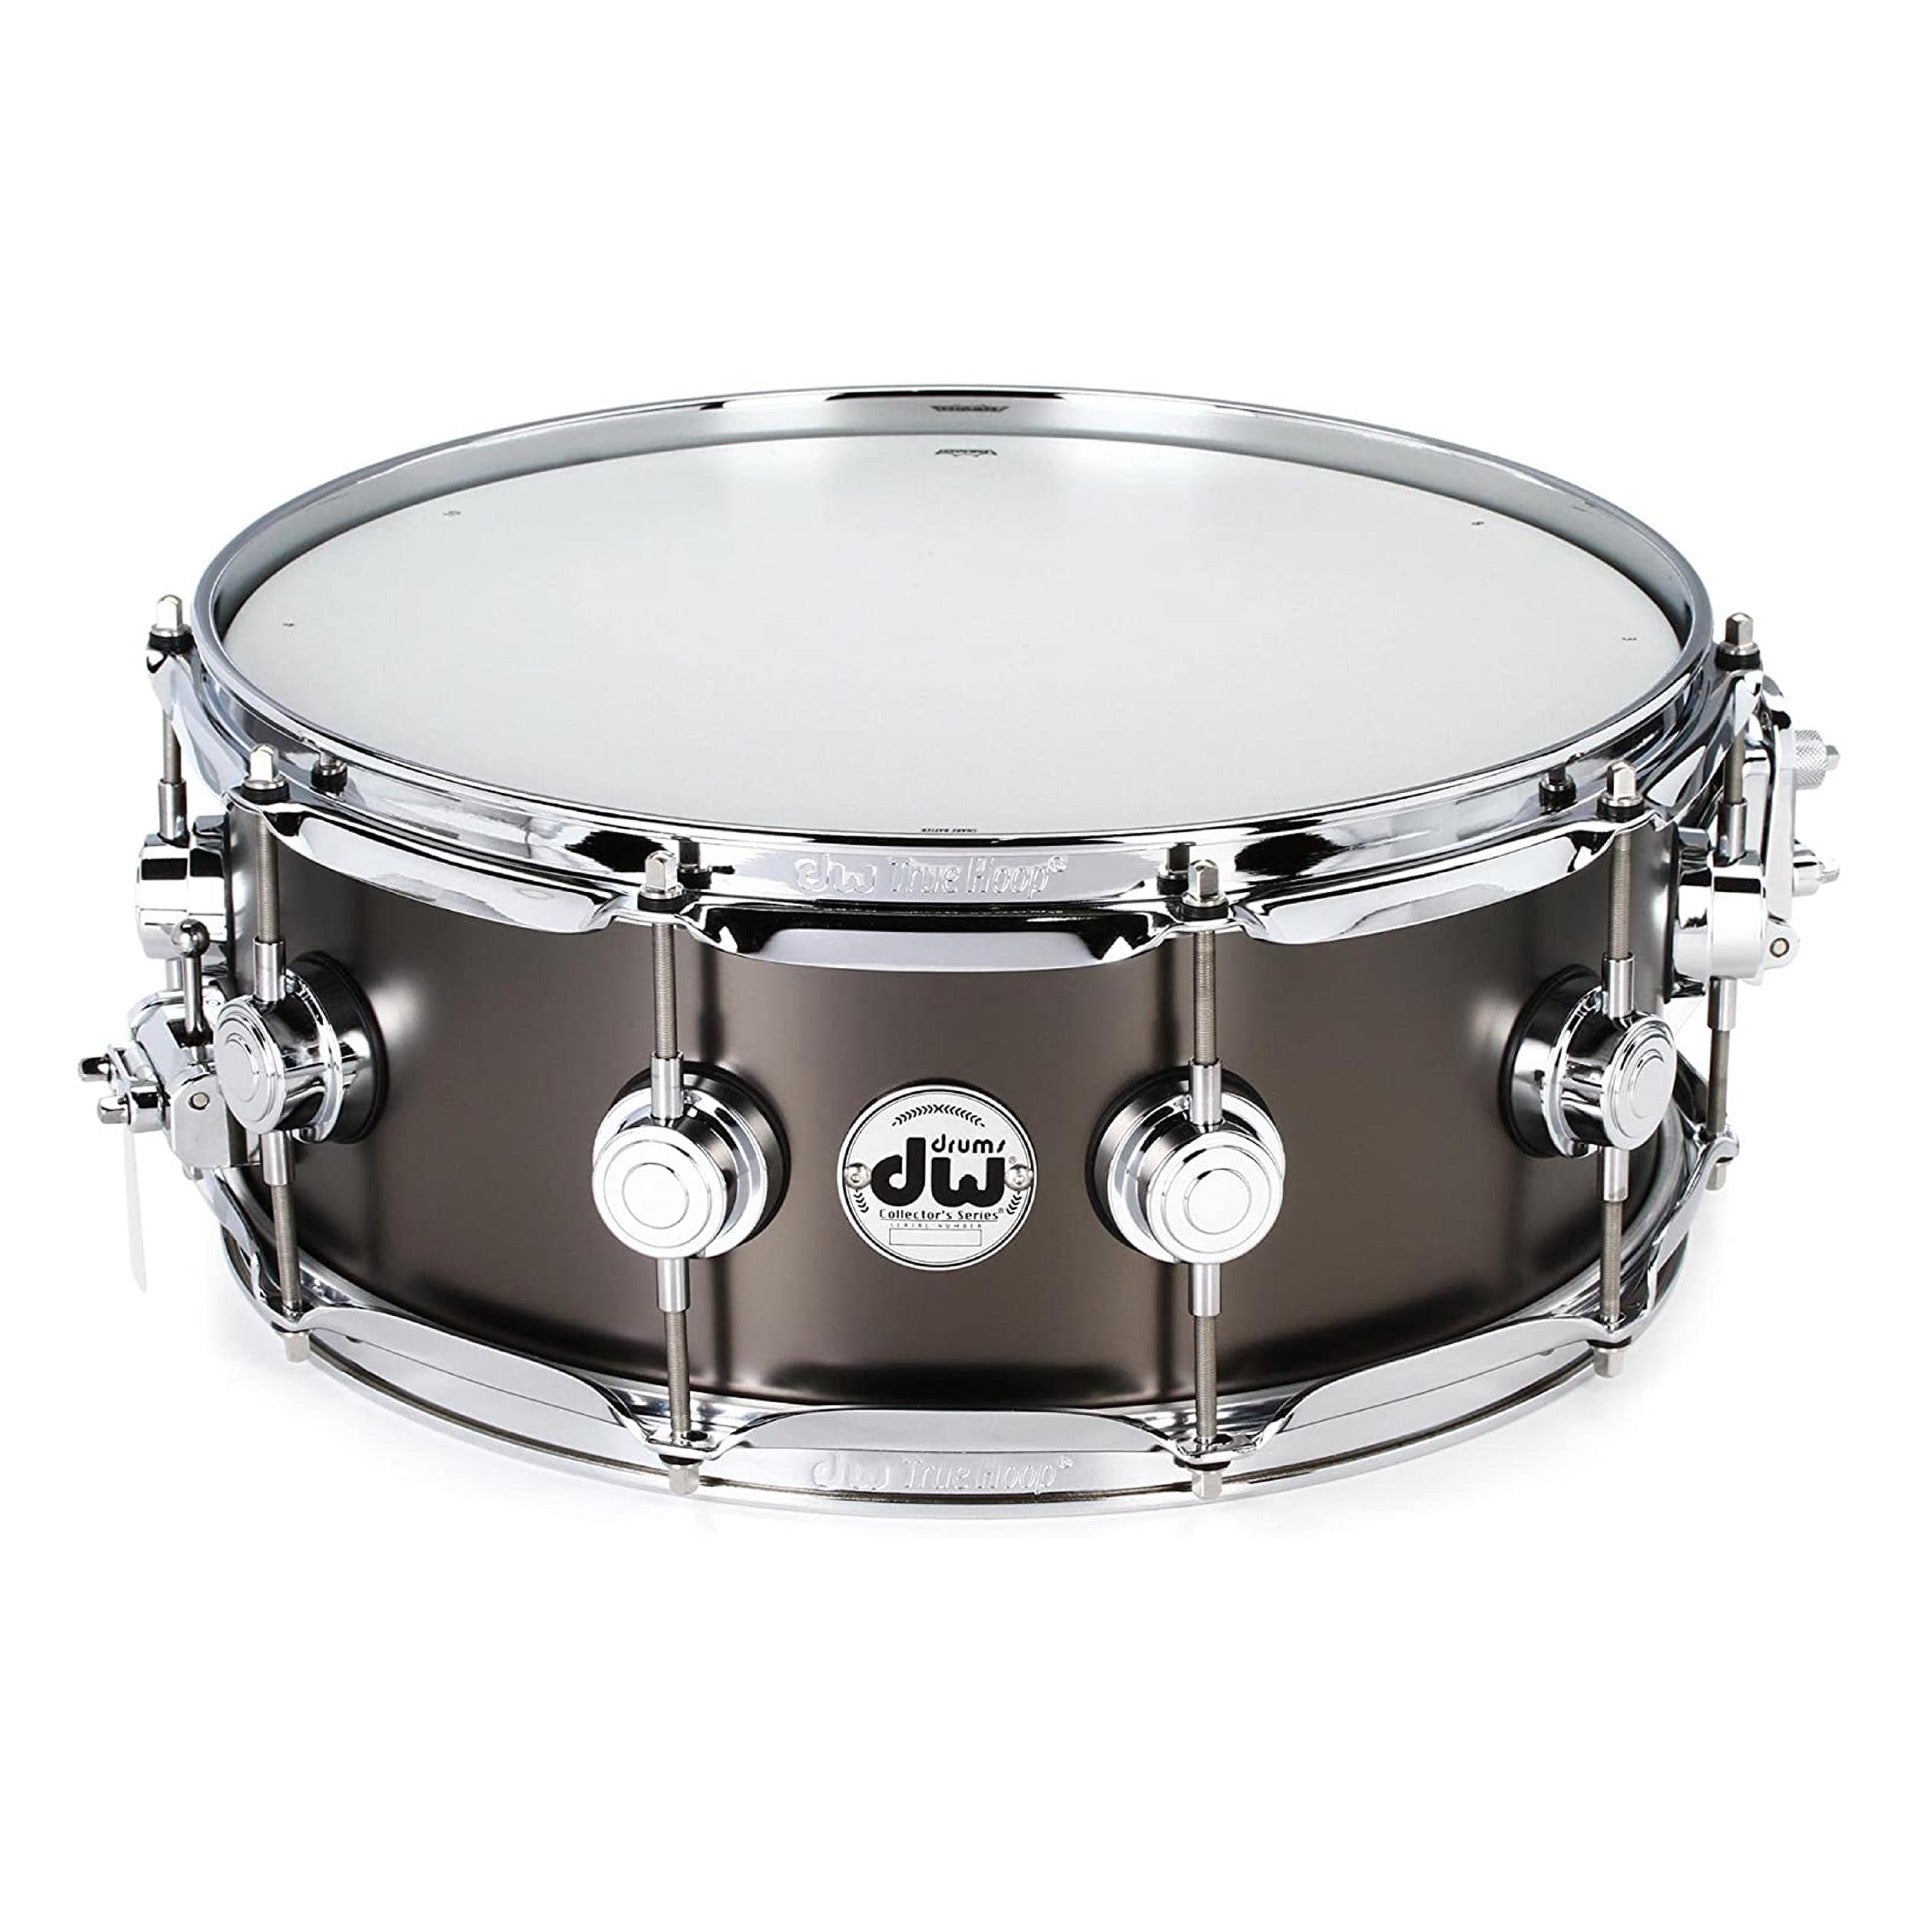 DW Collector's Series Metal Snare Drum - 5.5 x 14 inch - Satin